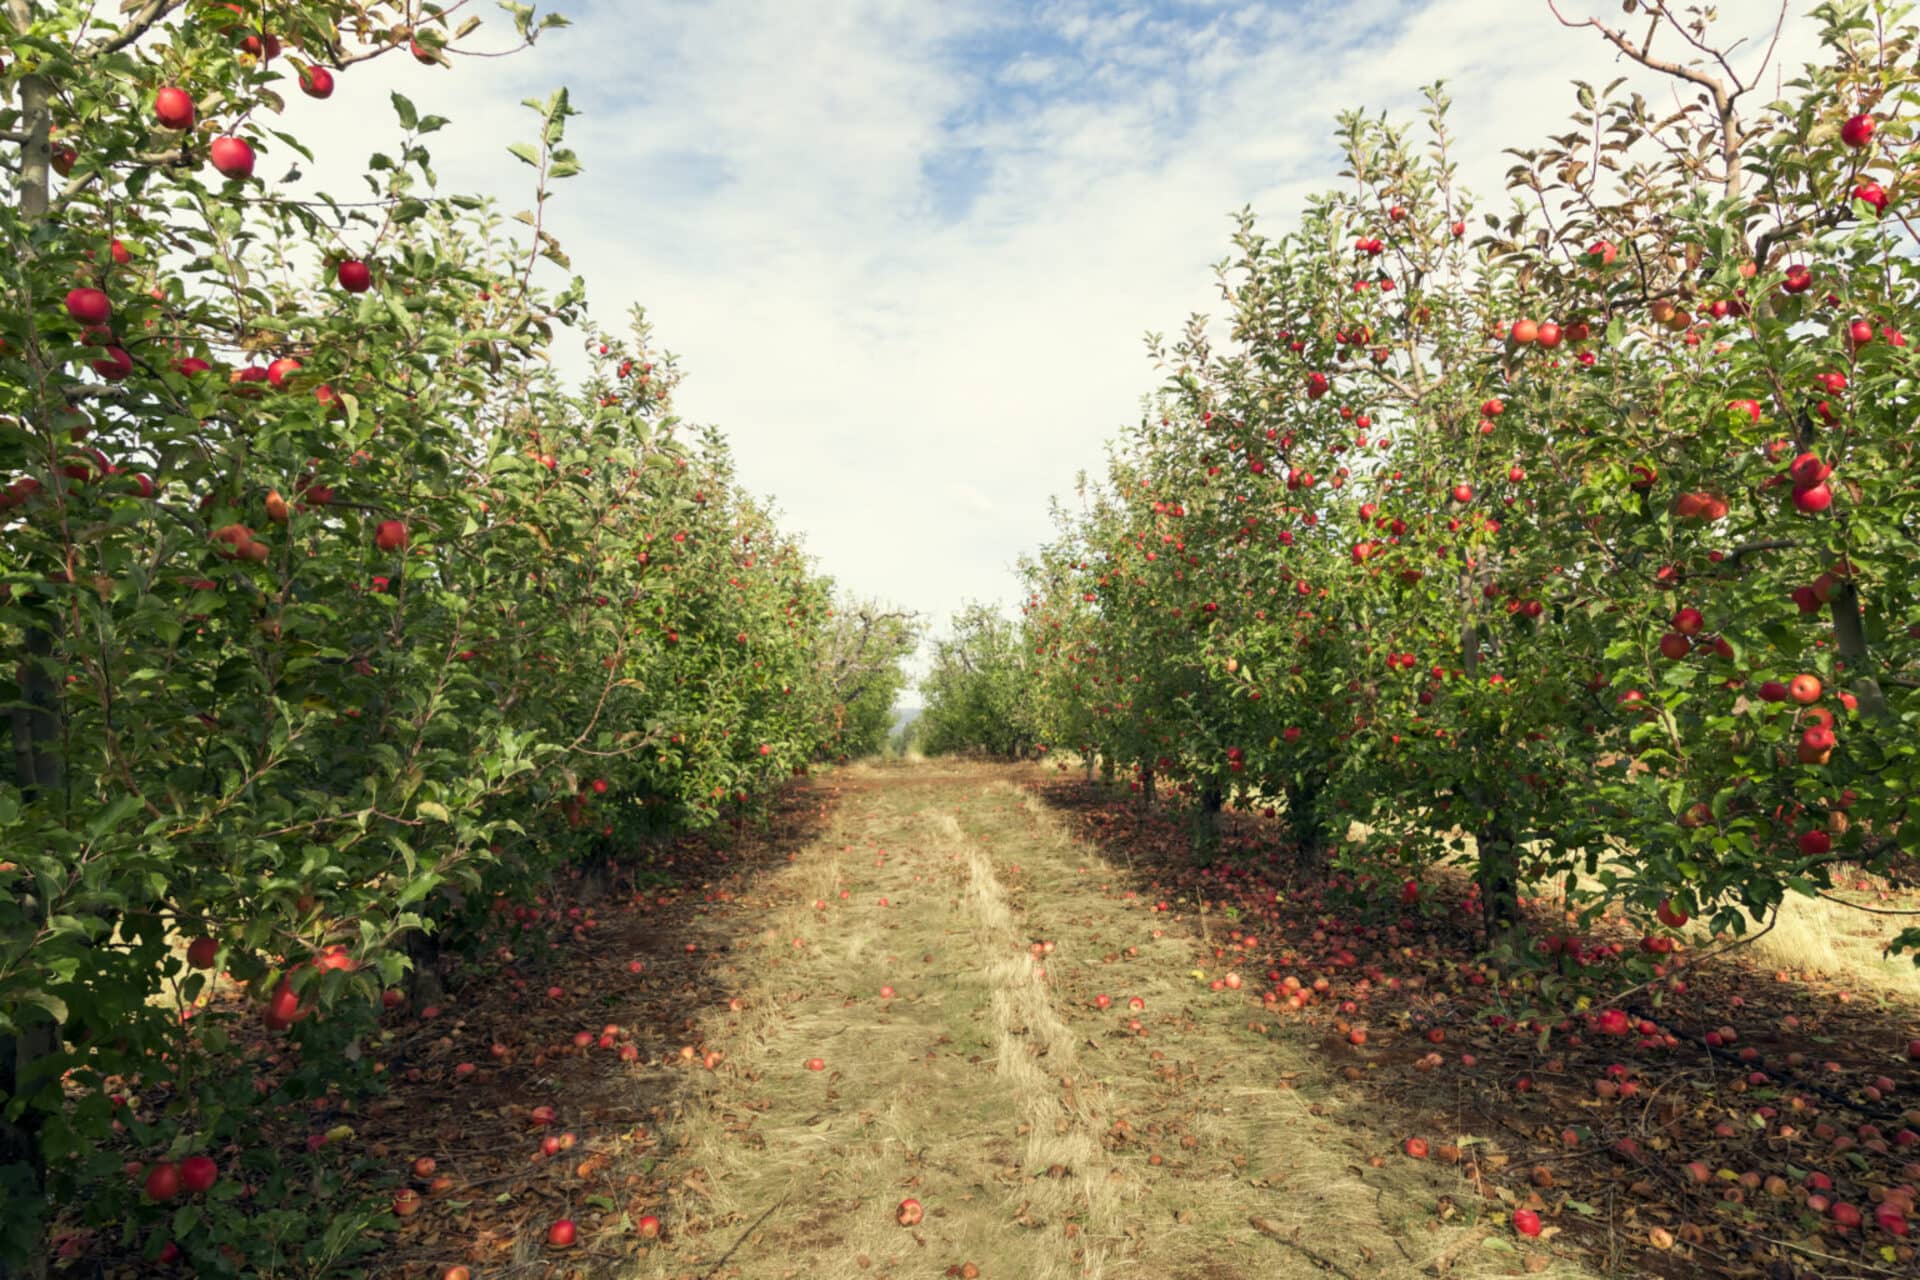 An apple orchard with rows of red apples.